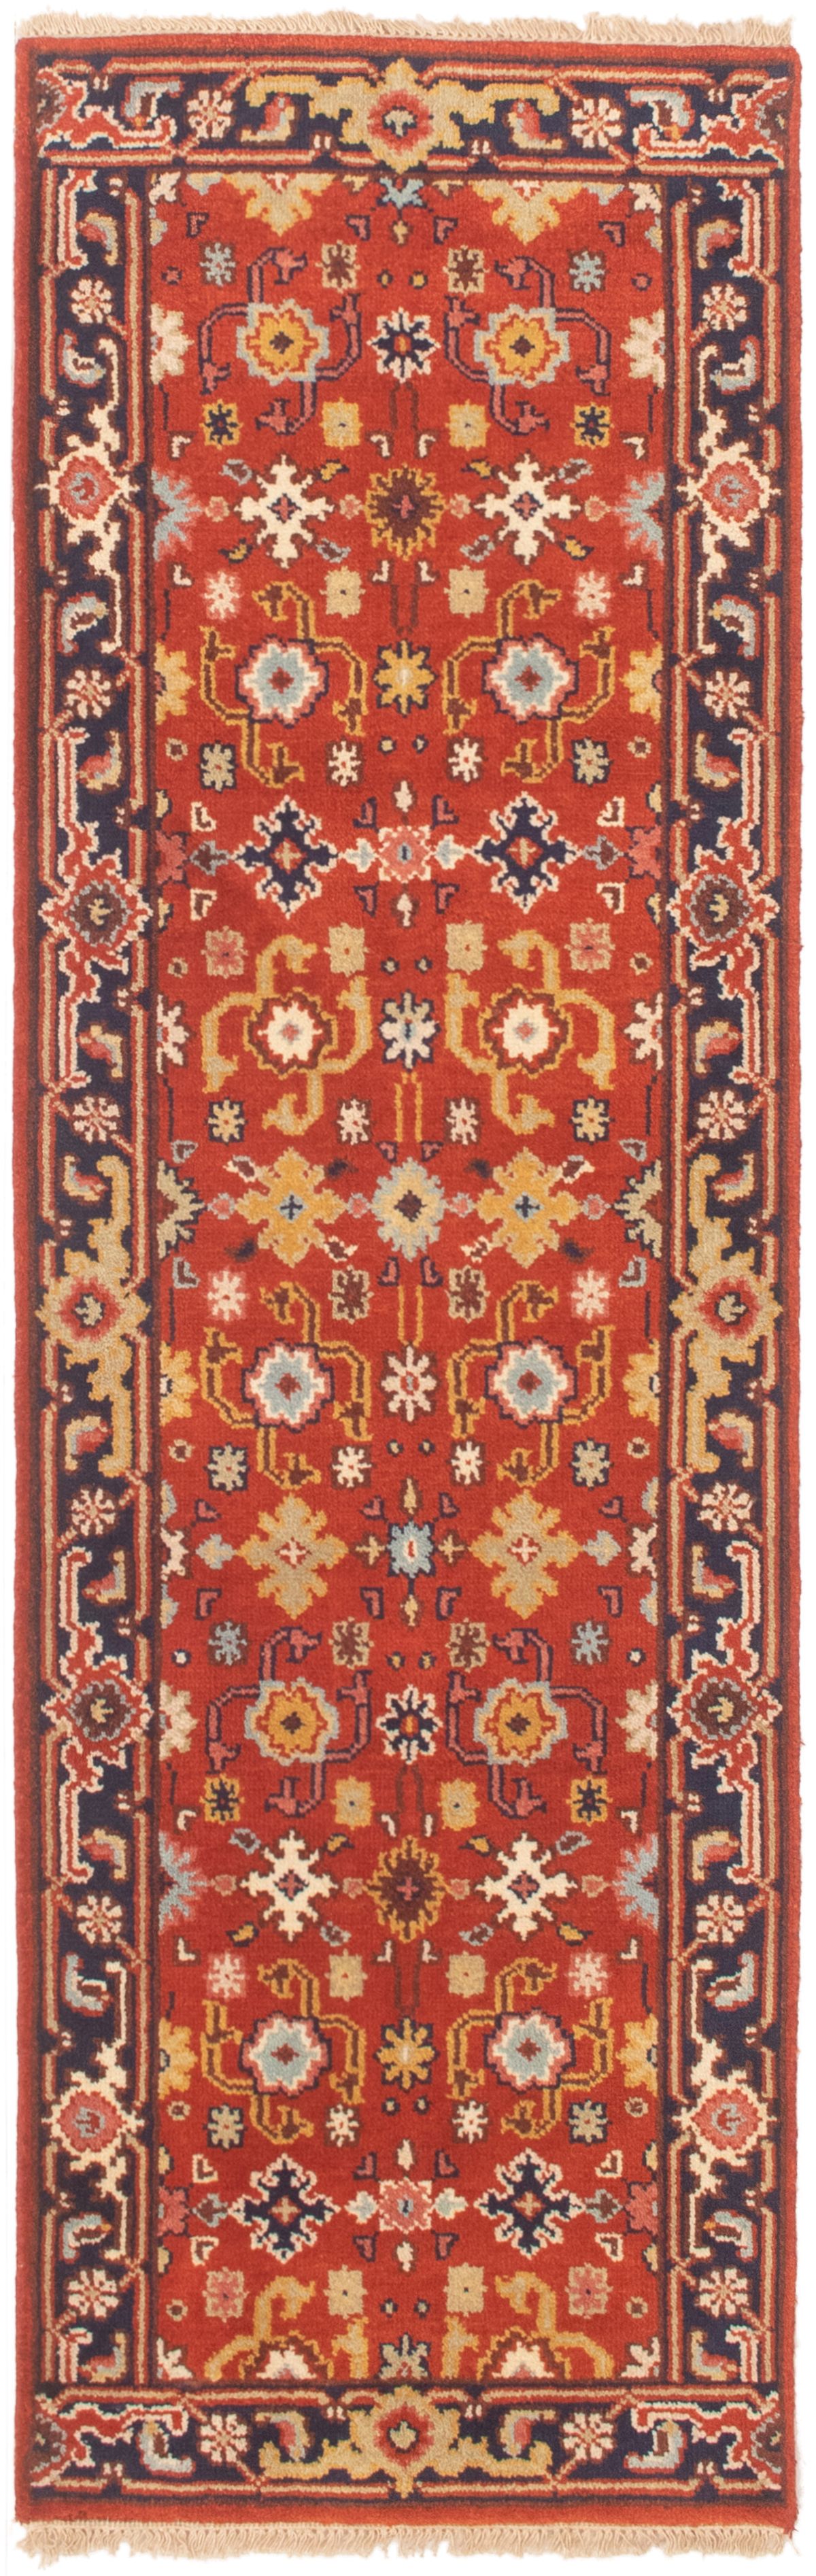 Hand-knotted Serapi Heritage Red Wool Rug 2'5" x 7'11"  Size: 2'5" x 7'11"  